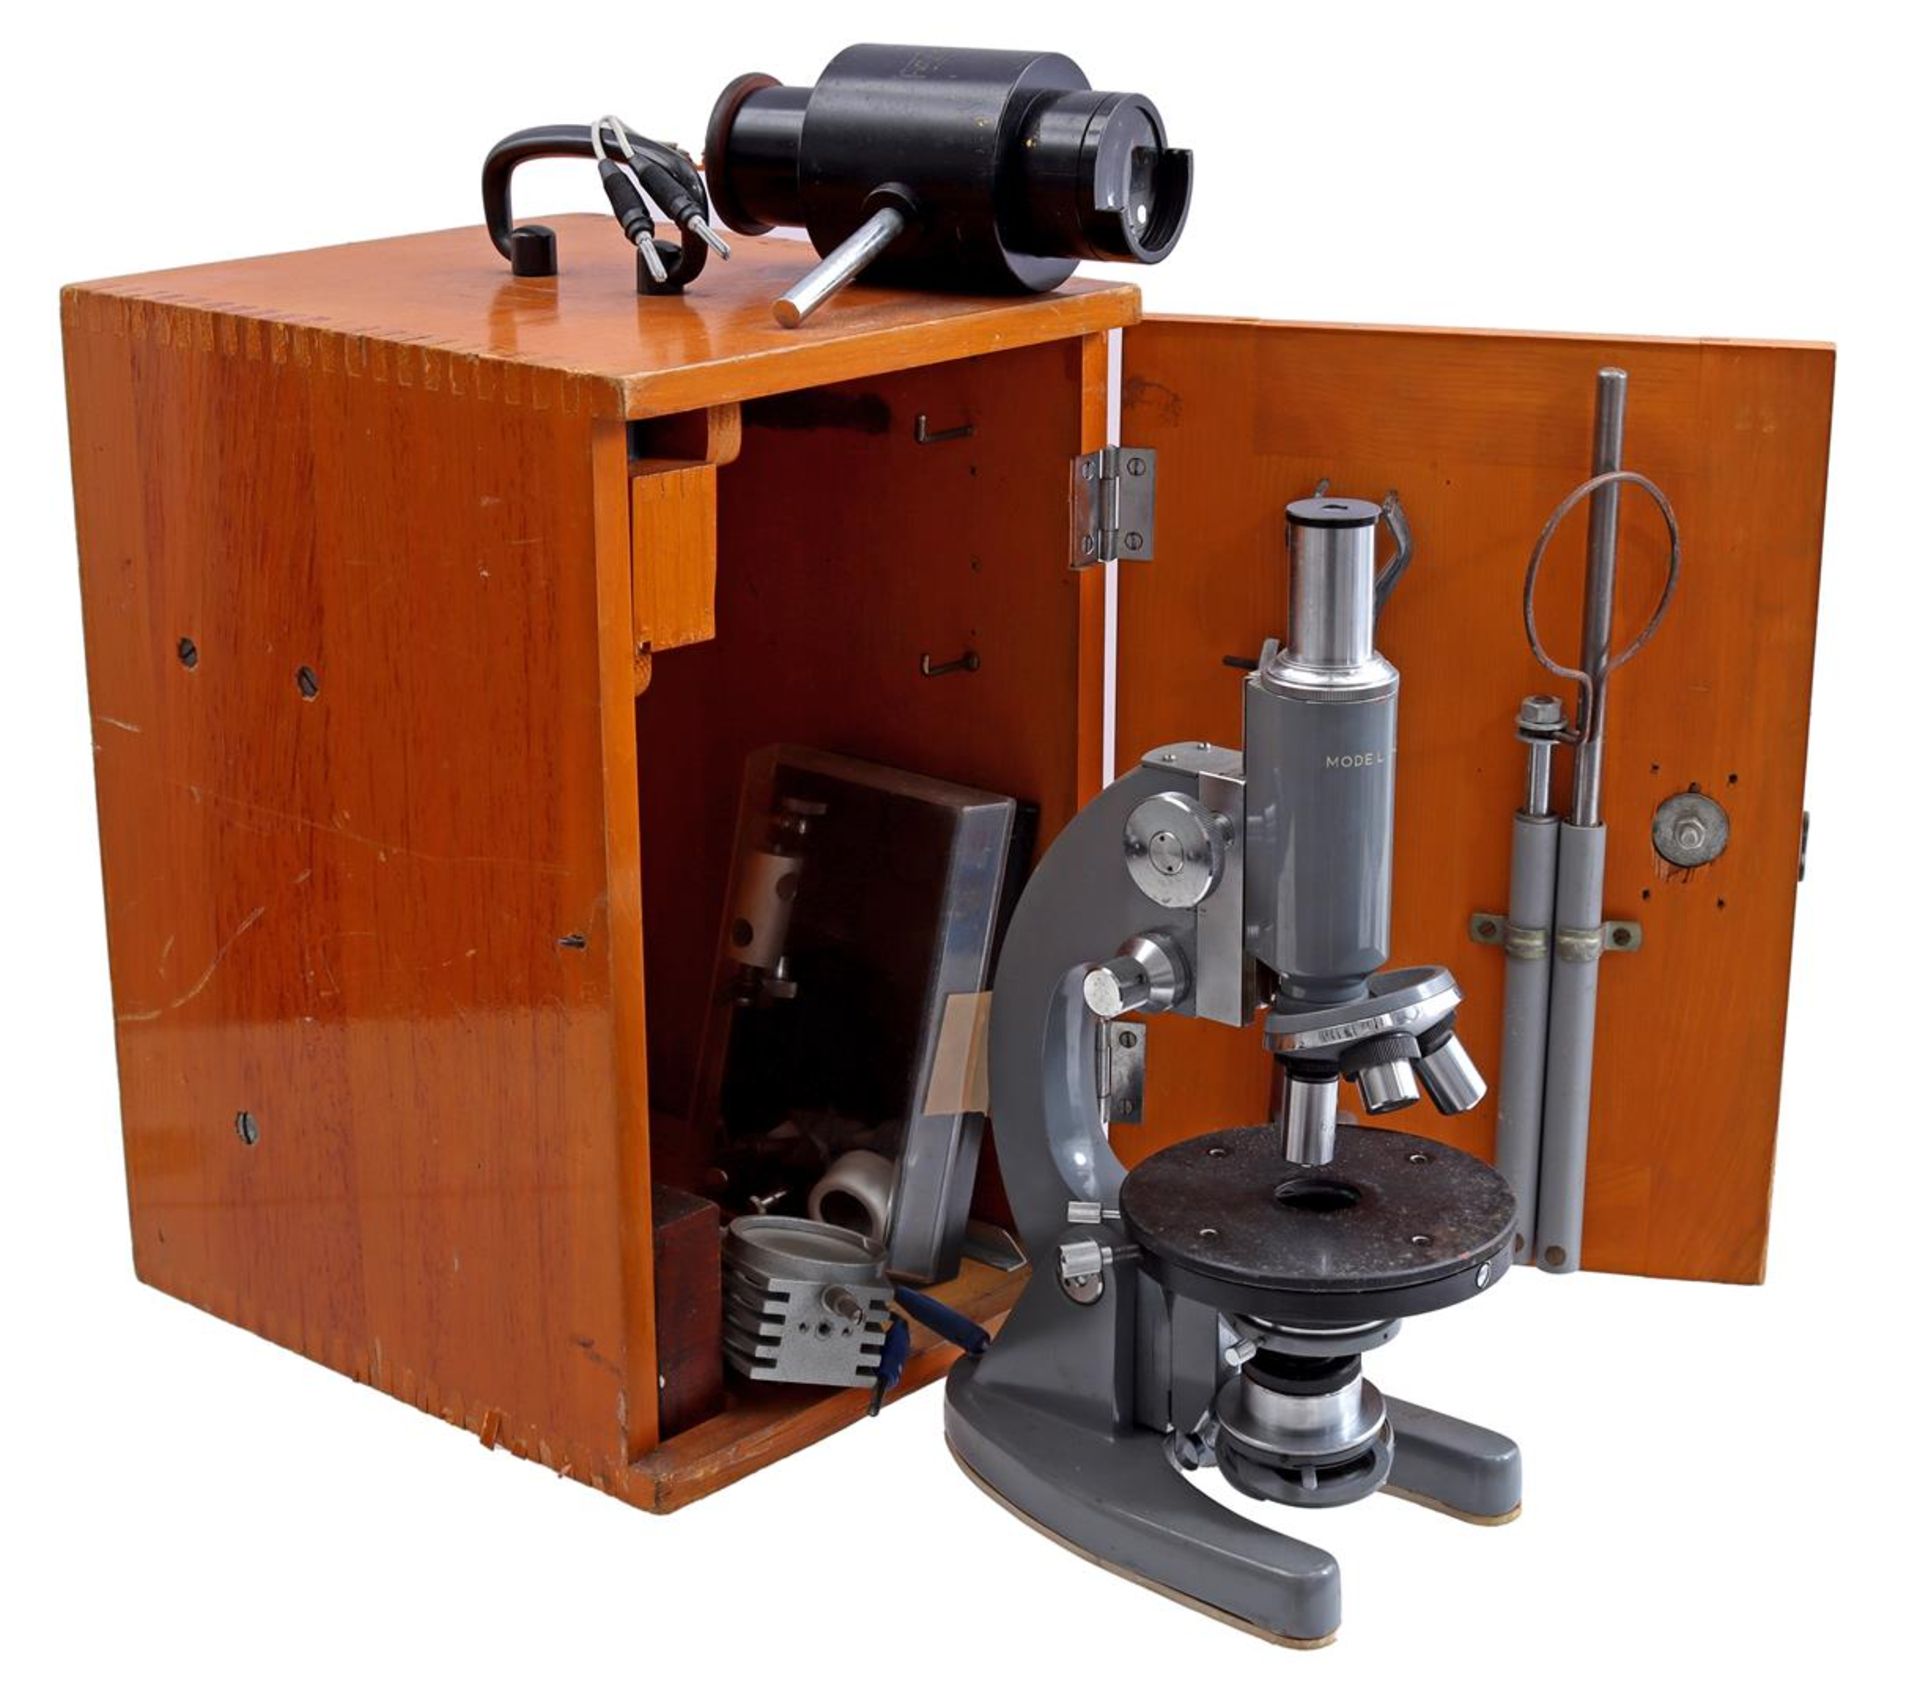 Microscope with accessories